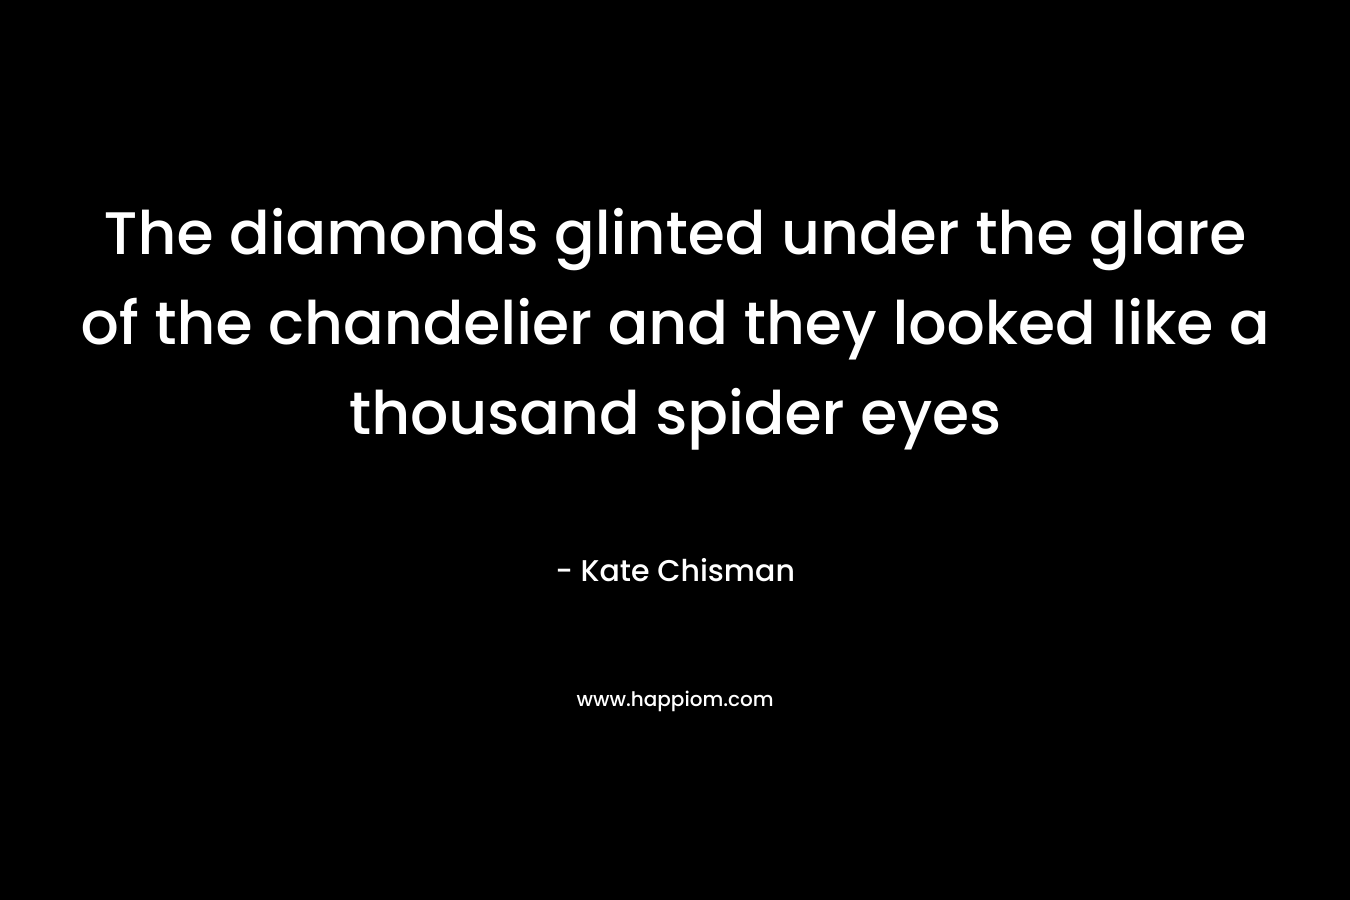 The diamonds glinted under the glare of the chandelier and they looked like a thousand spider eyes